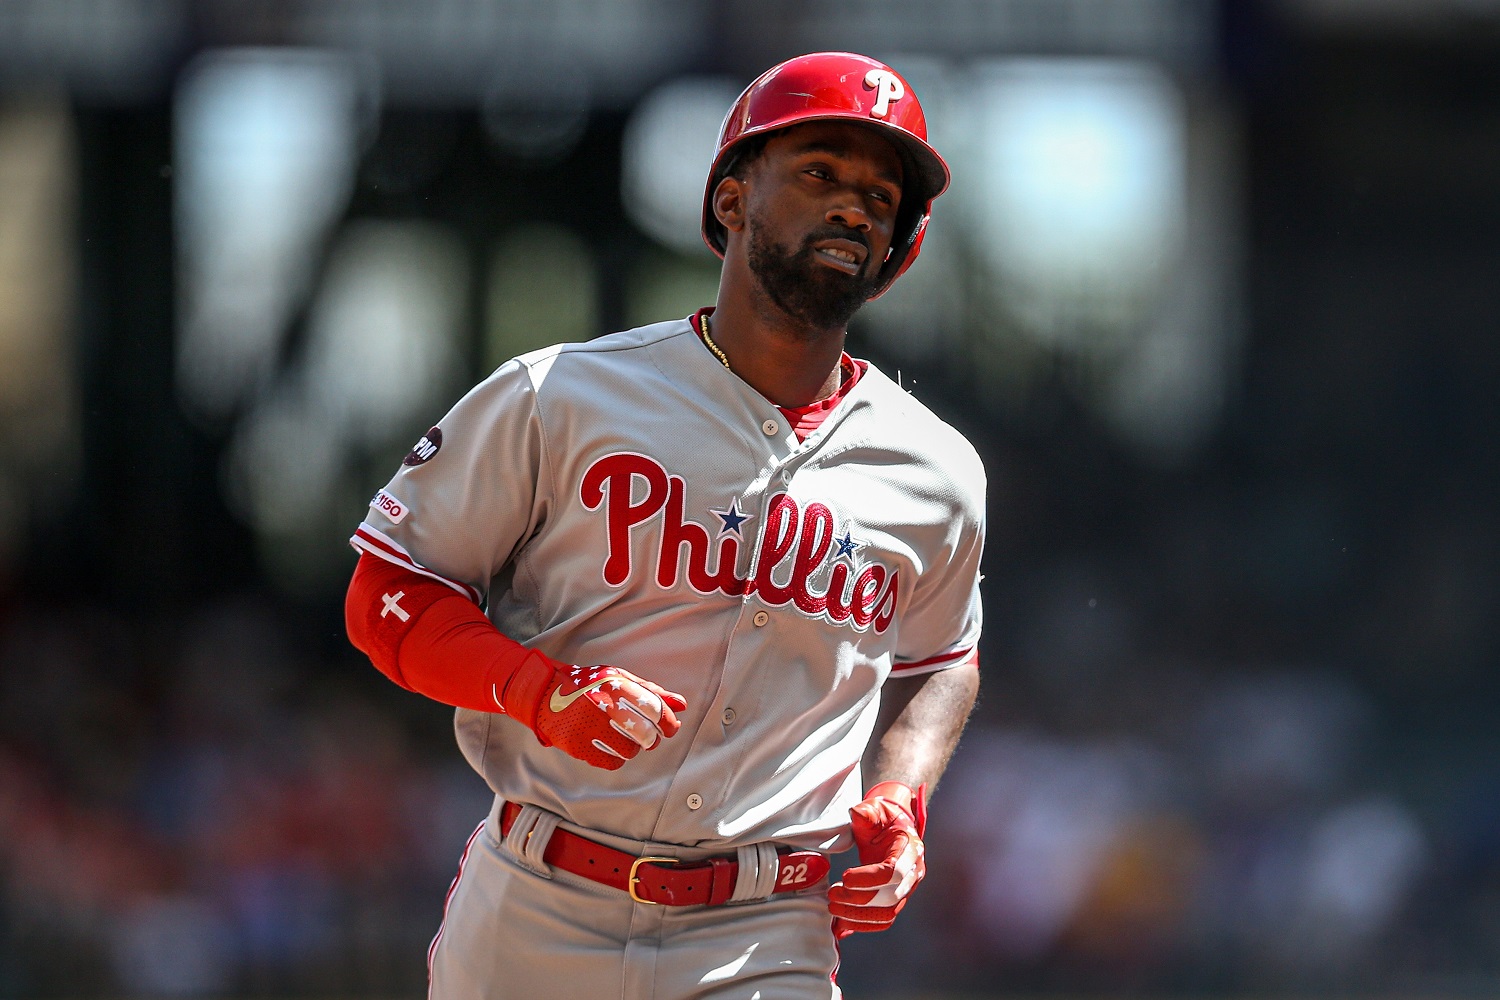 FOCO tries to capitalize on Phillies star Andrew McCutchen's